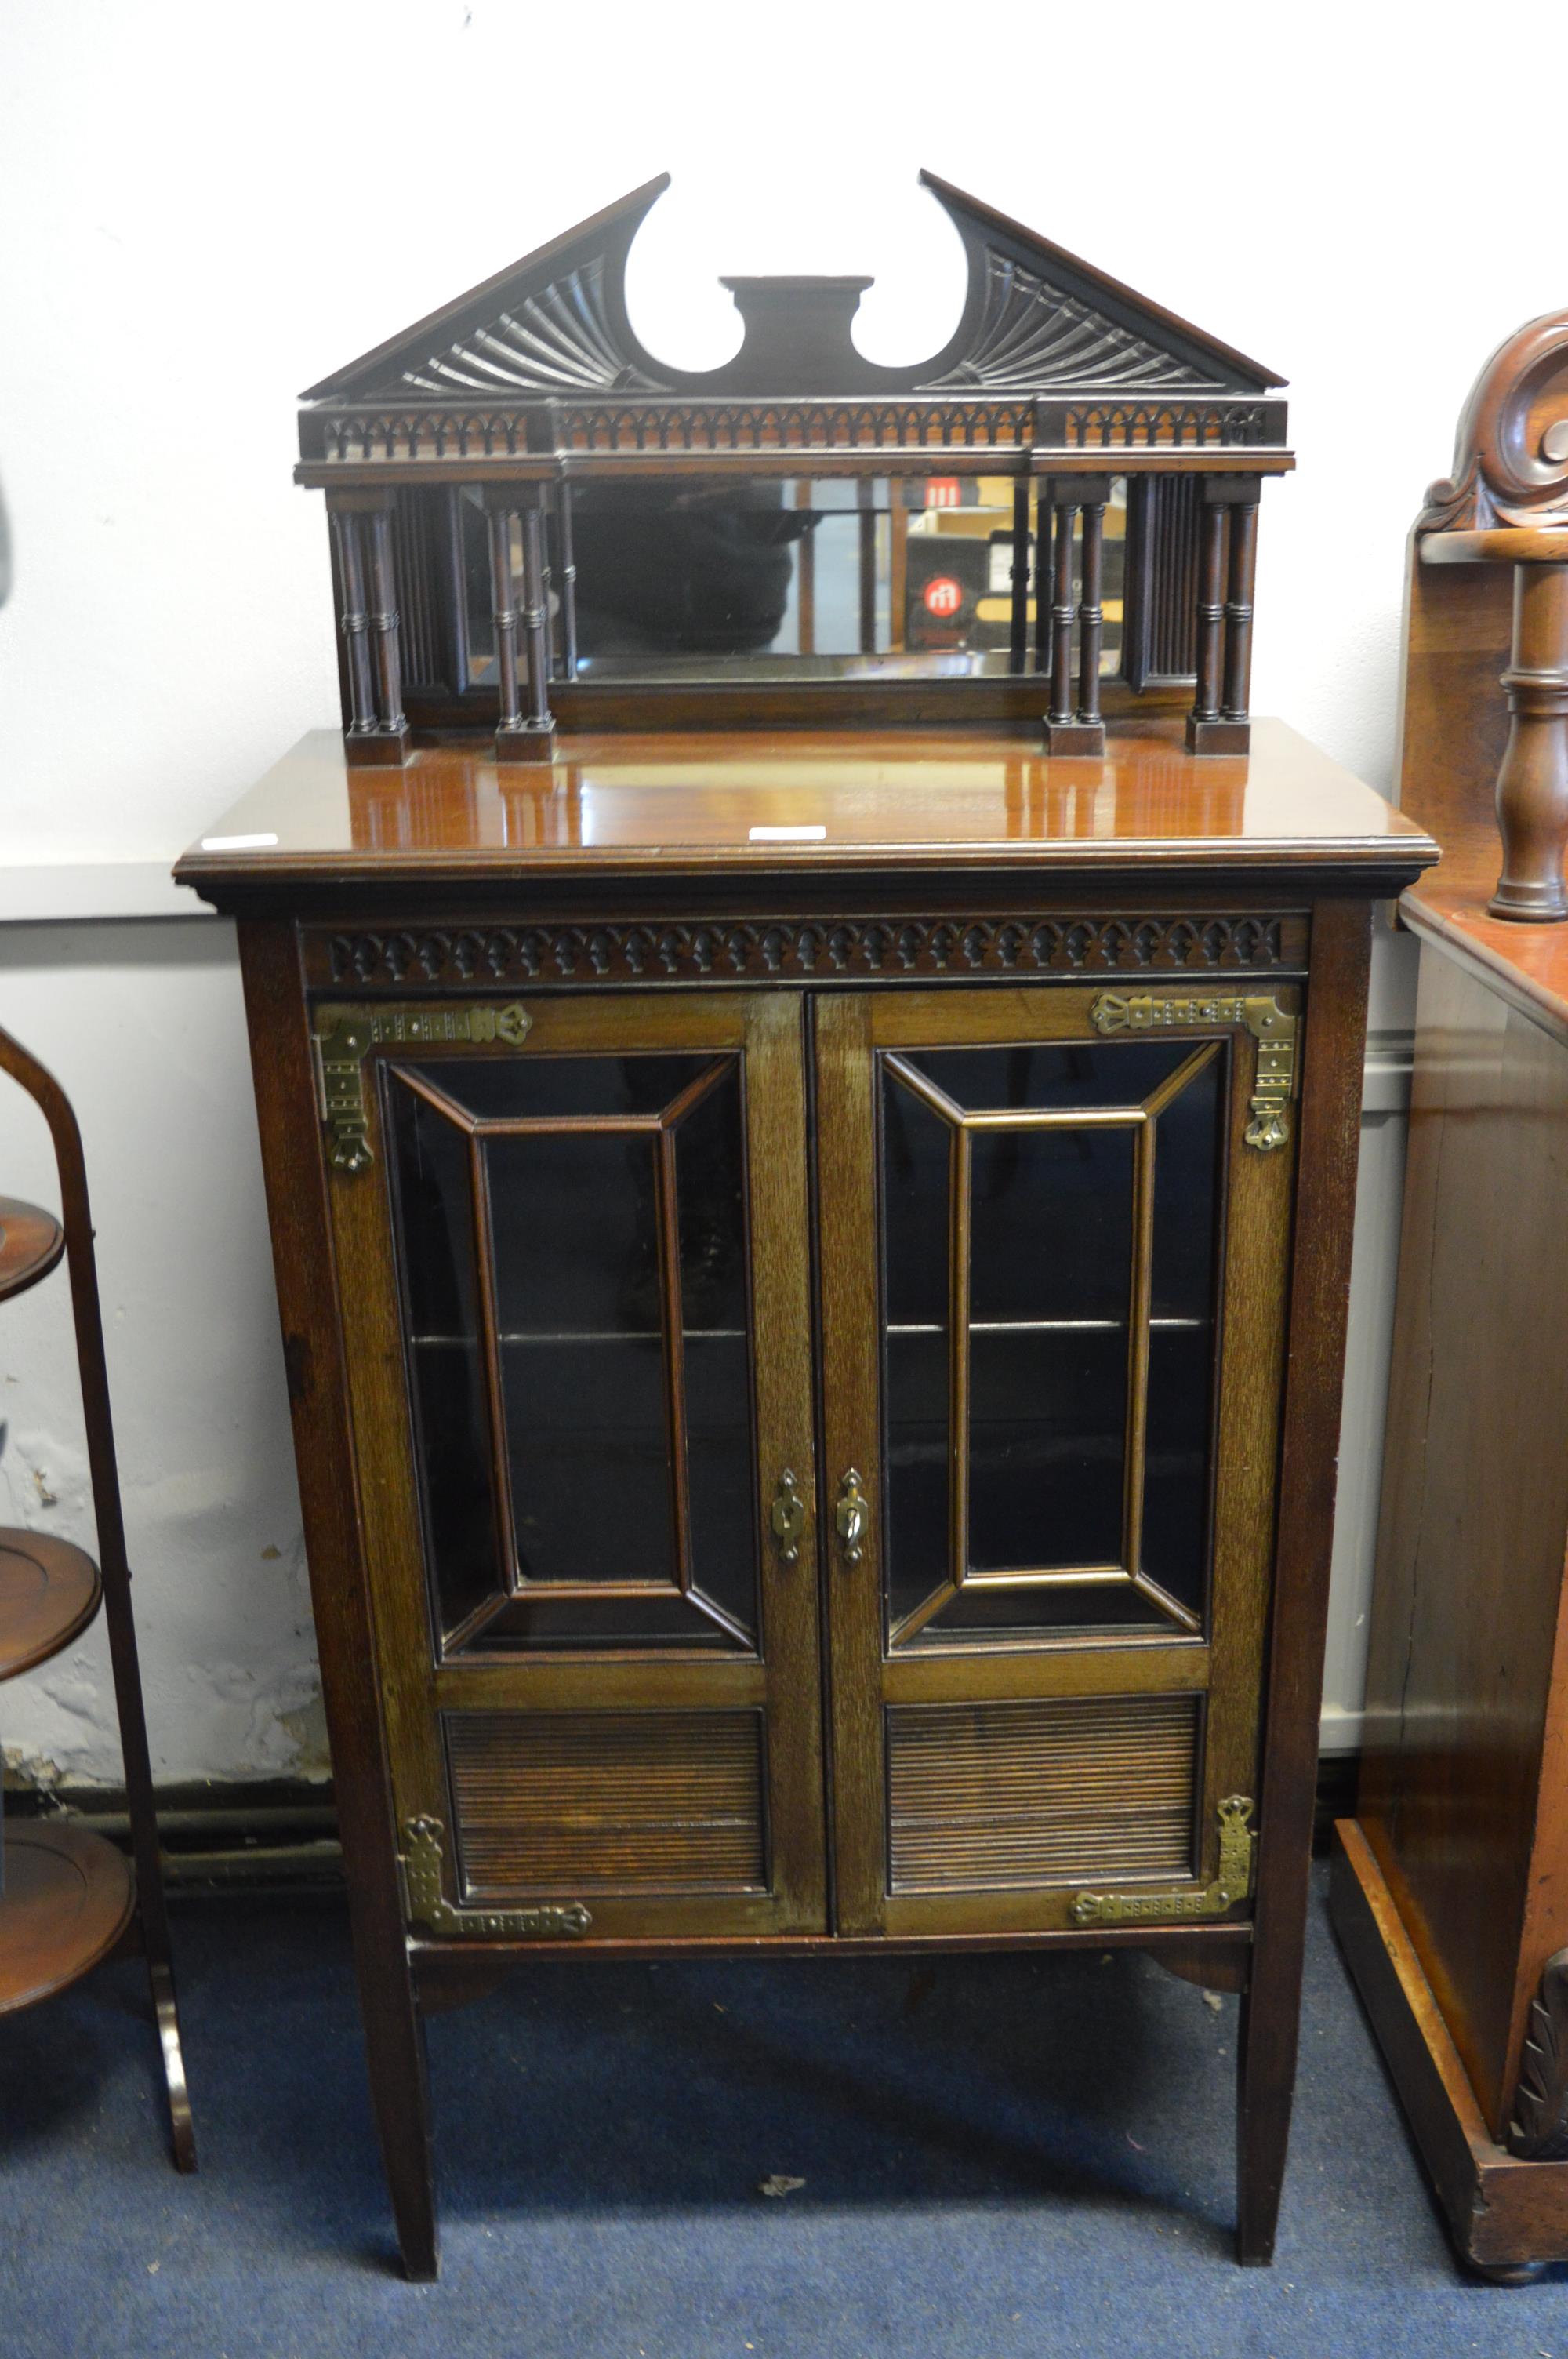 Victorian Mahogany Classical Mirrored Back Cabinet